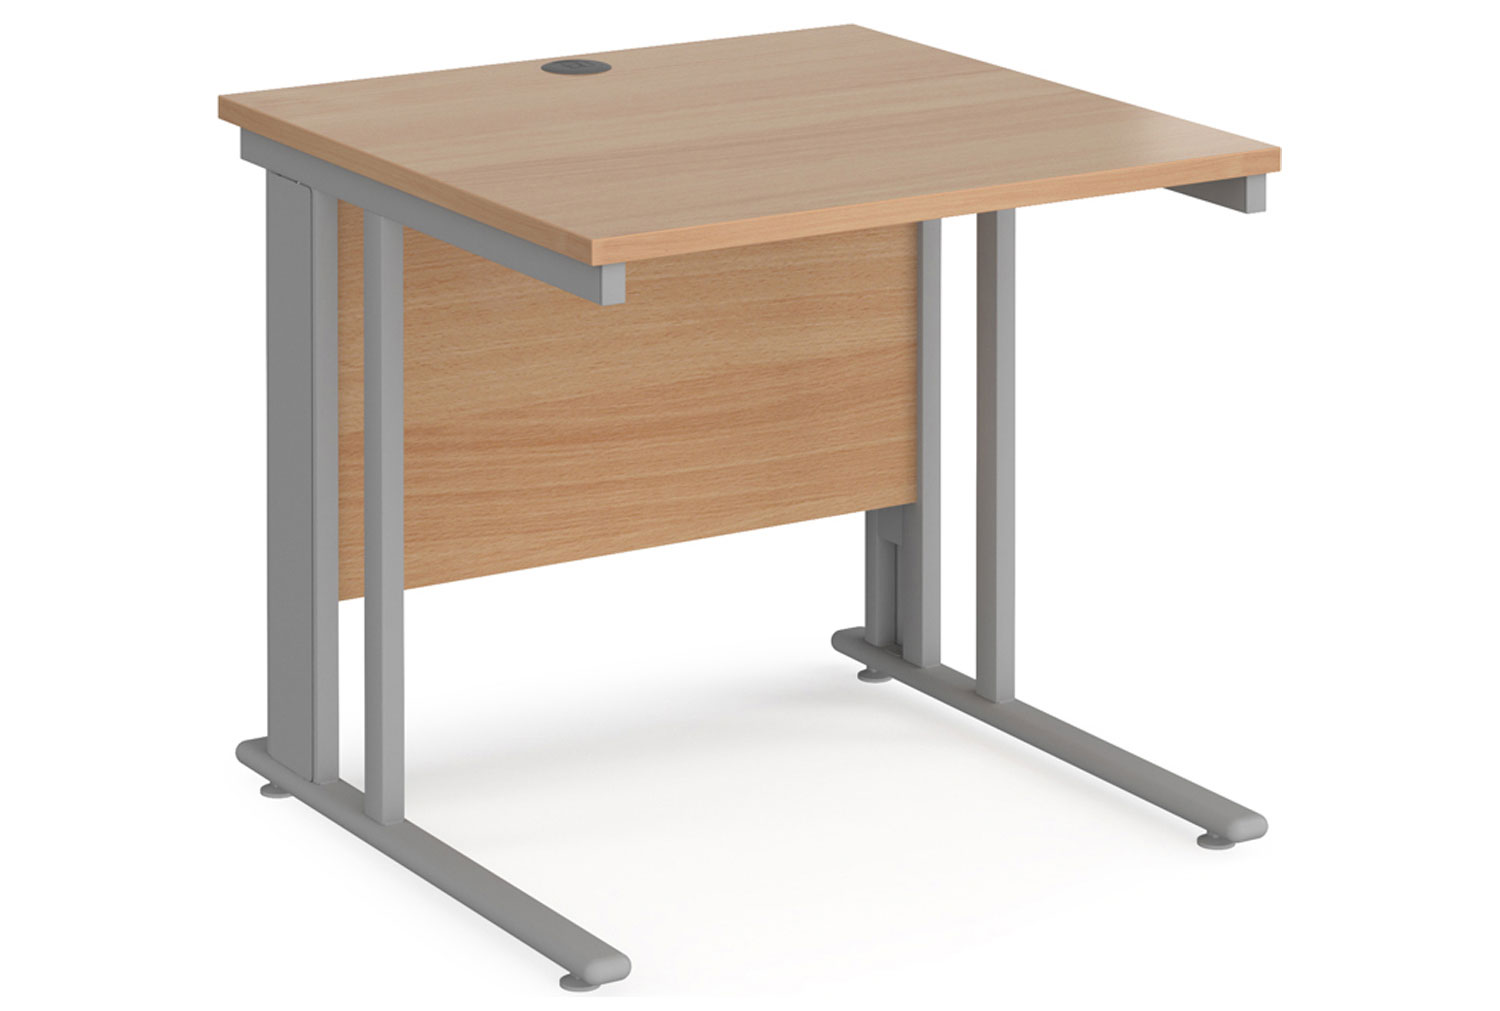 Value Line Deluxe Cable Managed Rectangular Office Desk (Silver Legs), 80wx80dx73h (cm), Beech, Fully Installed